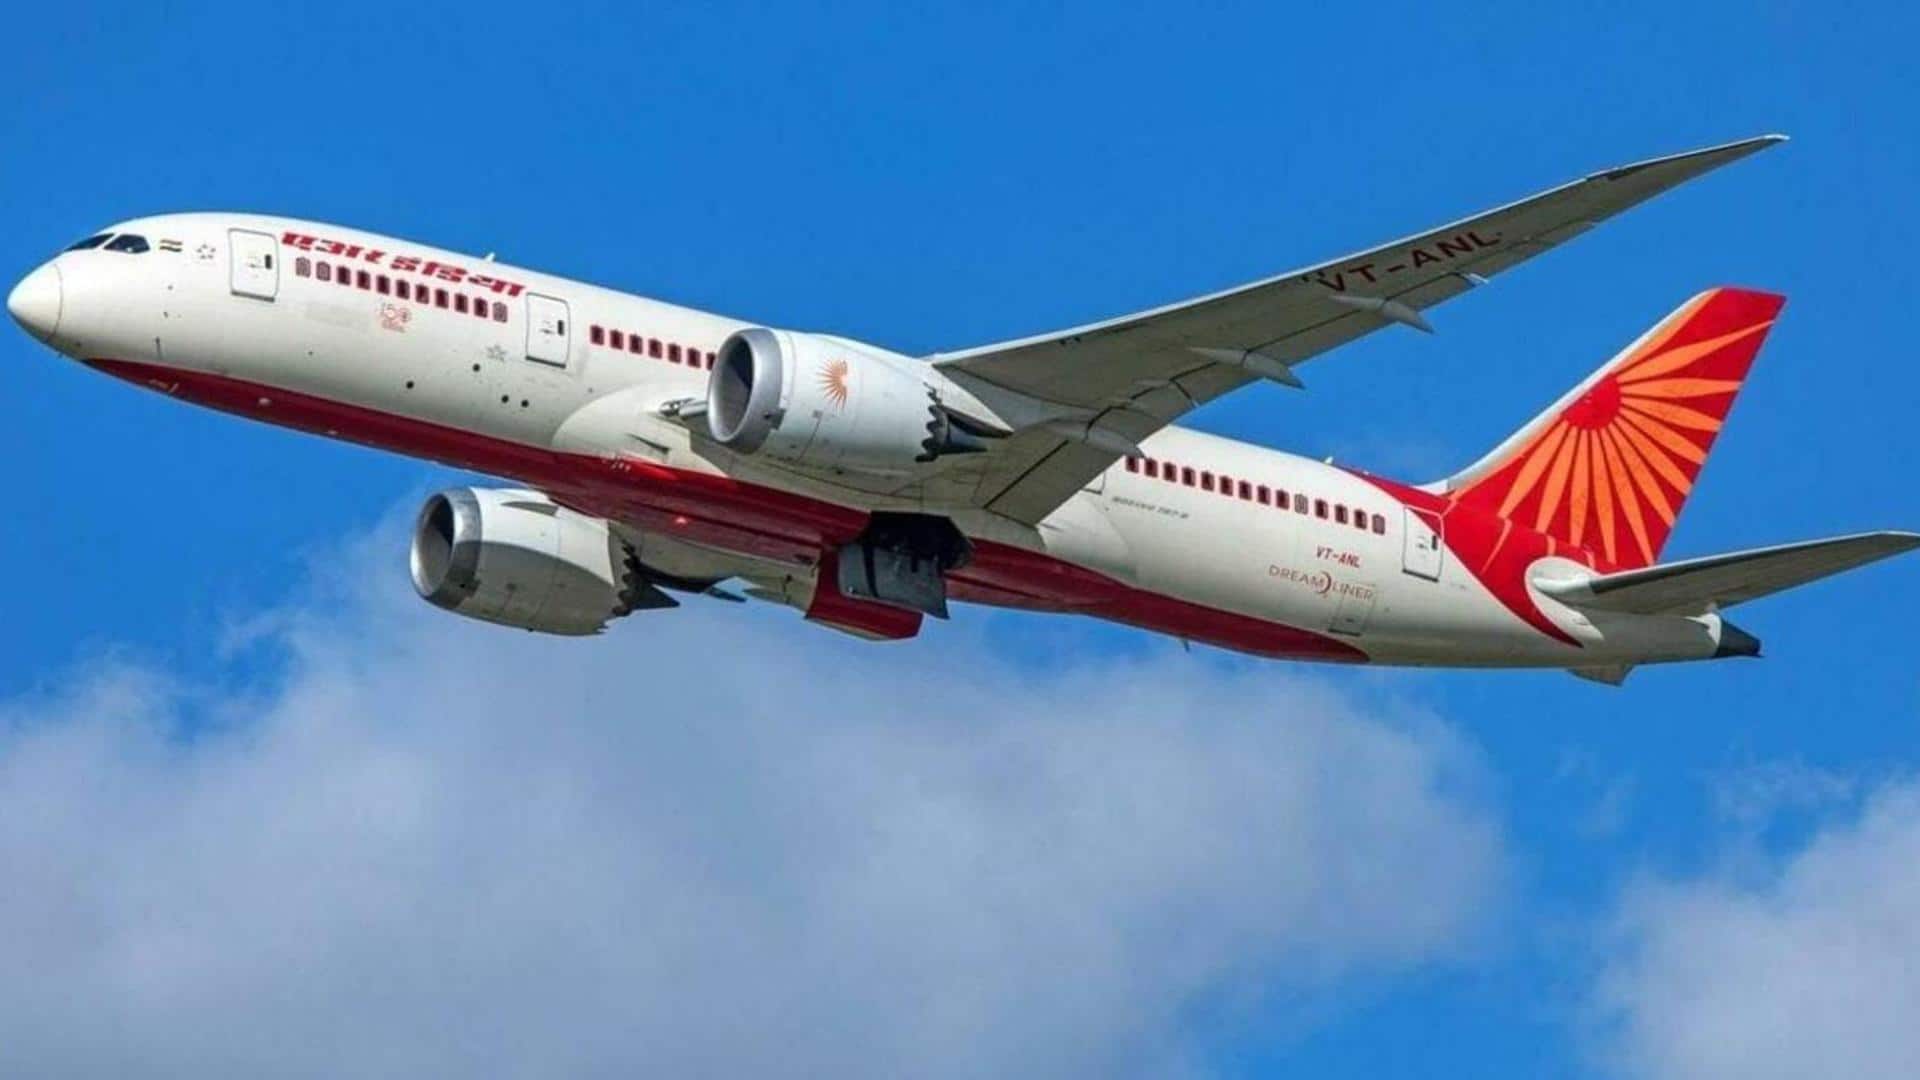 In historic deal, Air India to acquire 250 Airbus aircraft